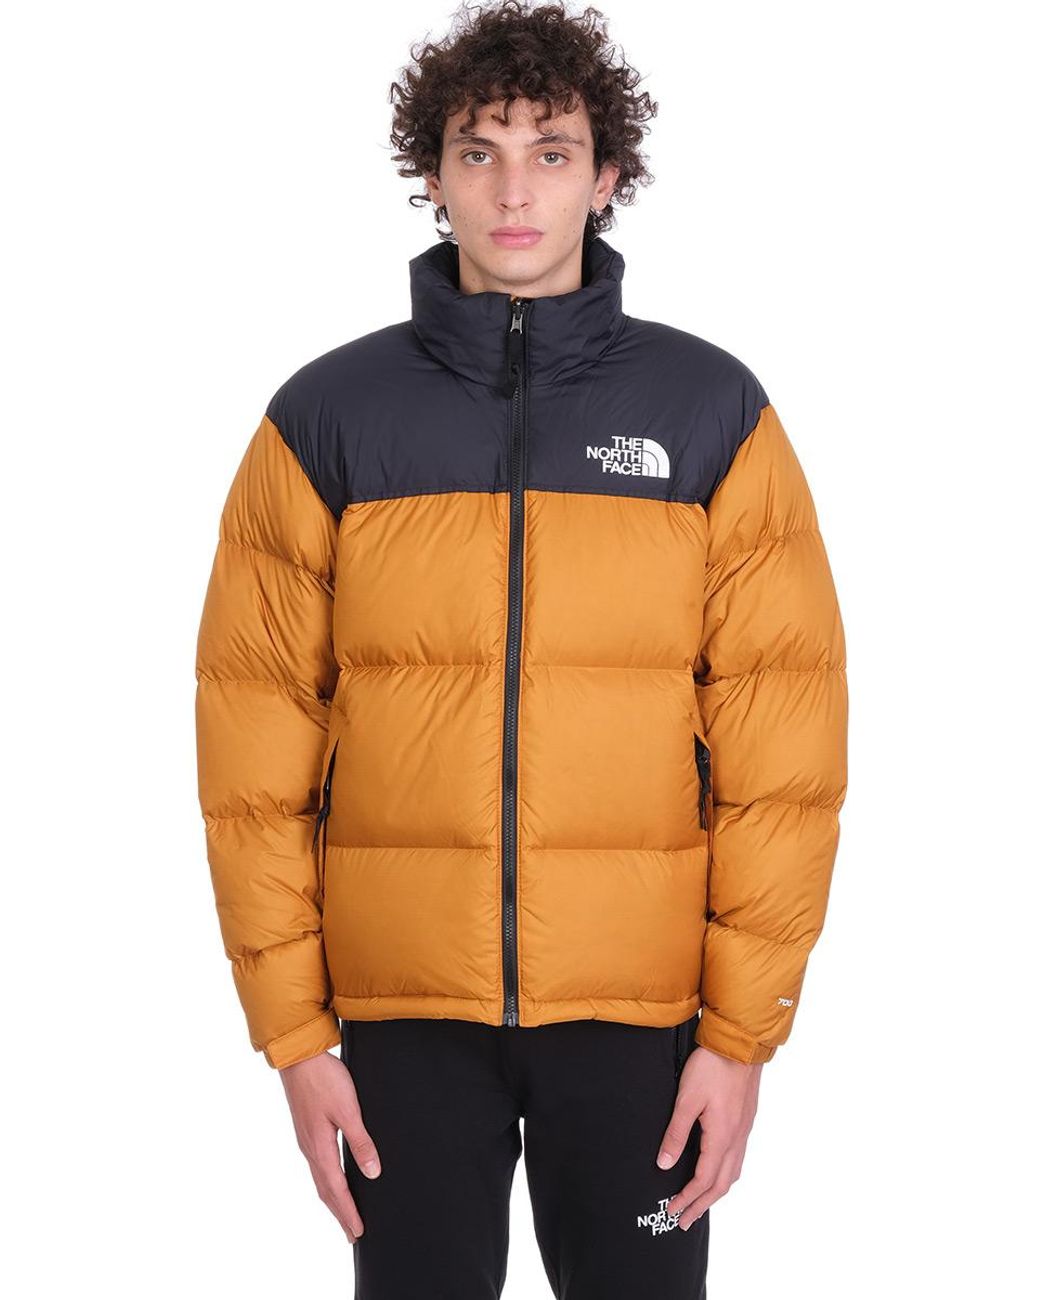 The North Face Yellow And Black 1996 Retro Nuptse Jacket for Men - Lyst